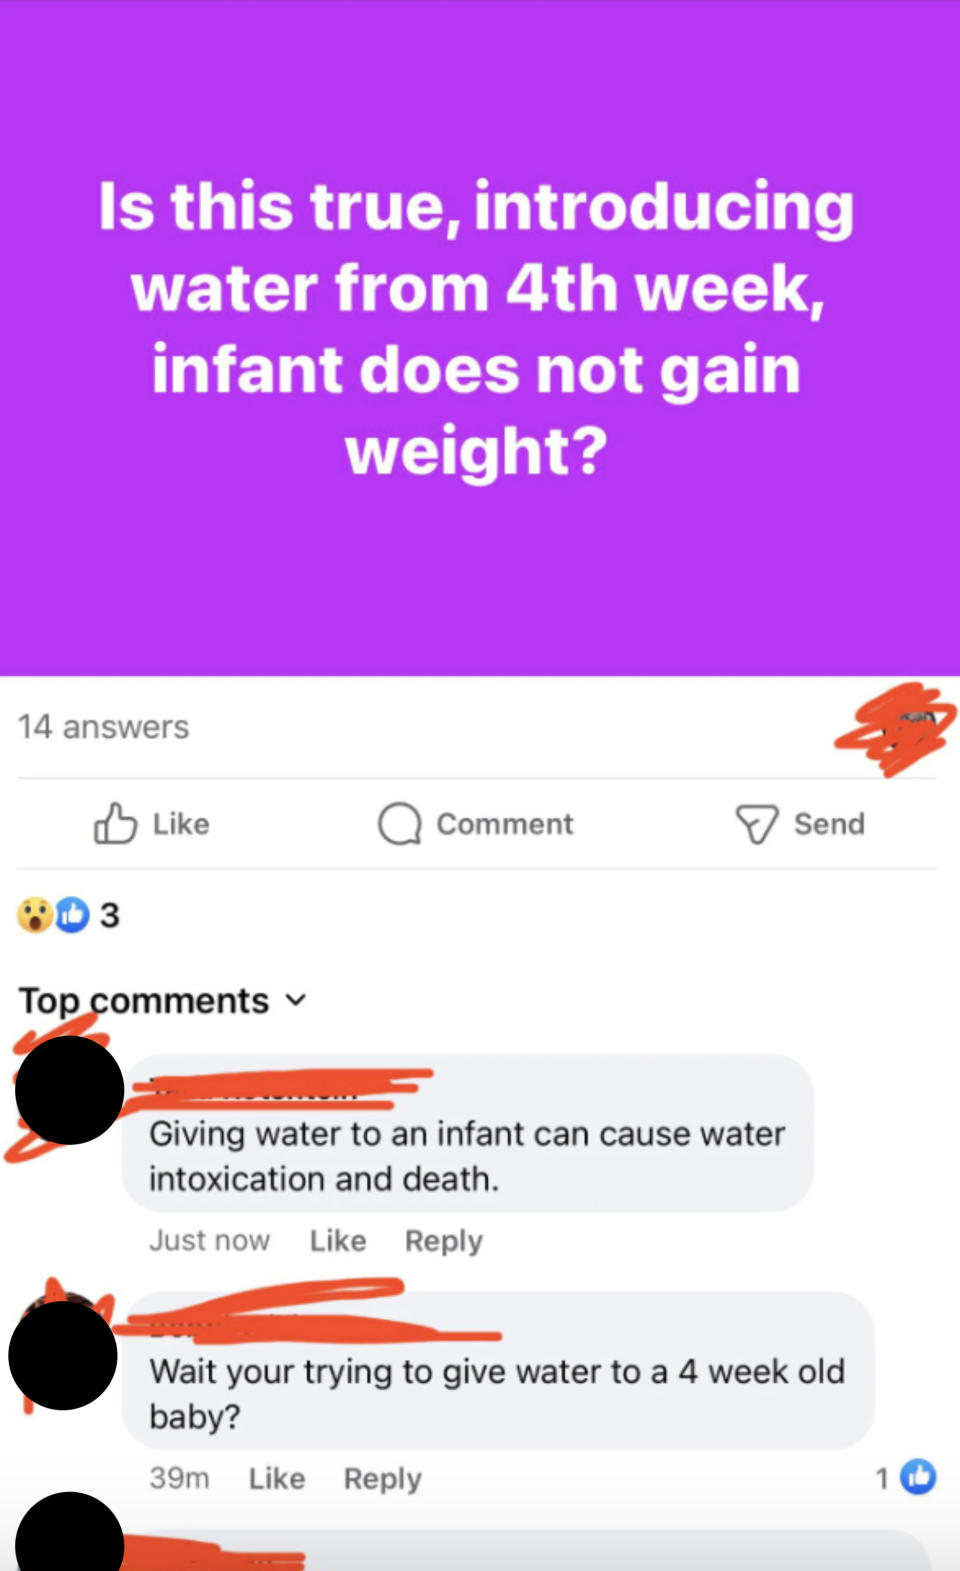 Screenshot of a Facebook post questioning if giving water to 4-week-old infants prevents weight gain. Comments warn against it, mentioning risks like water intoxication